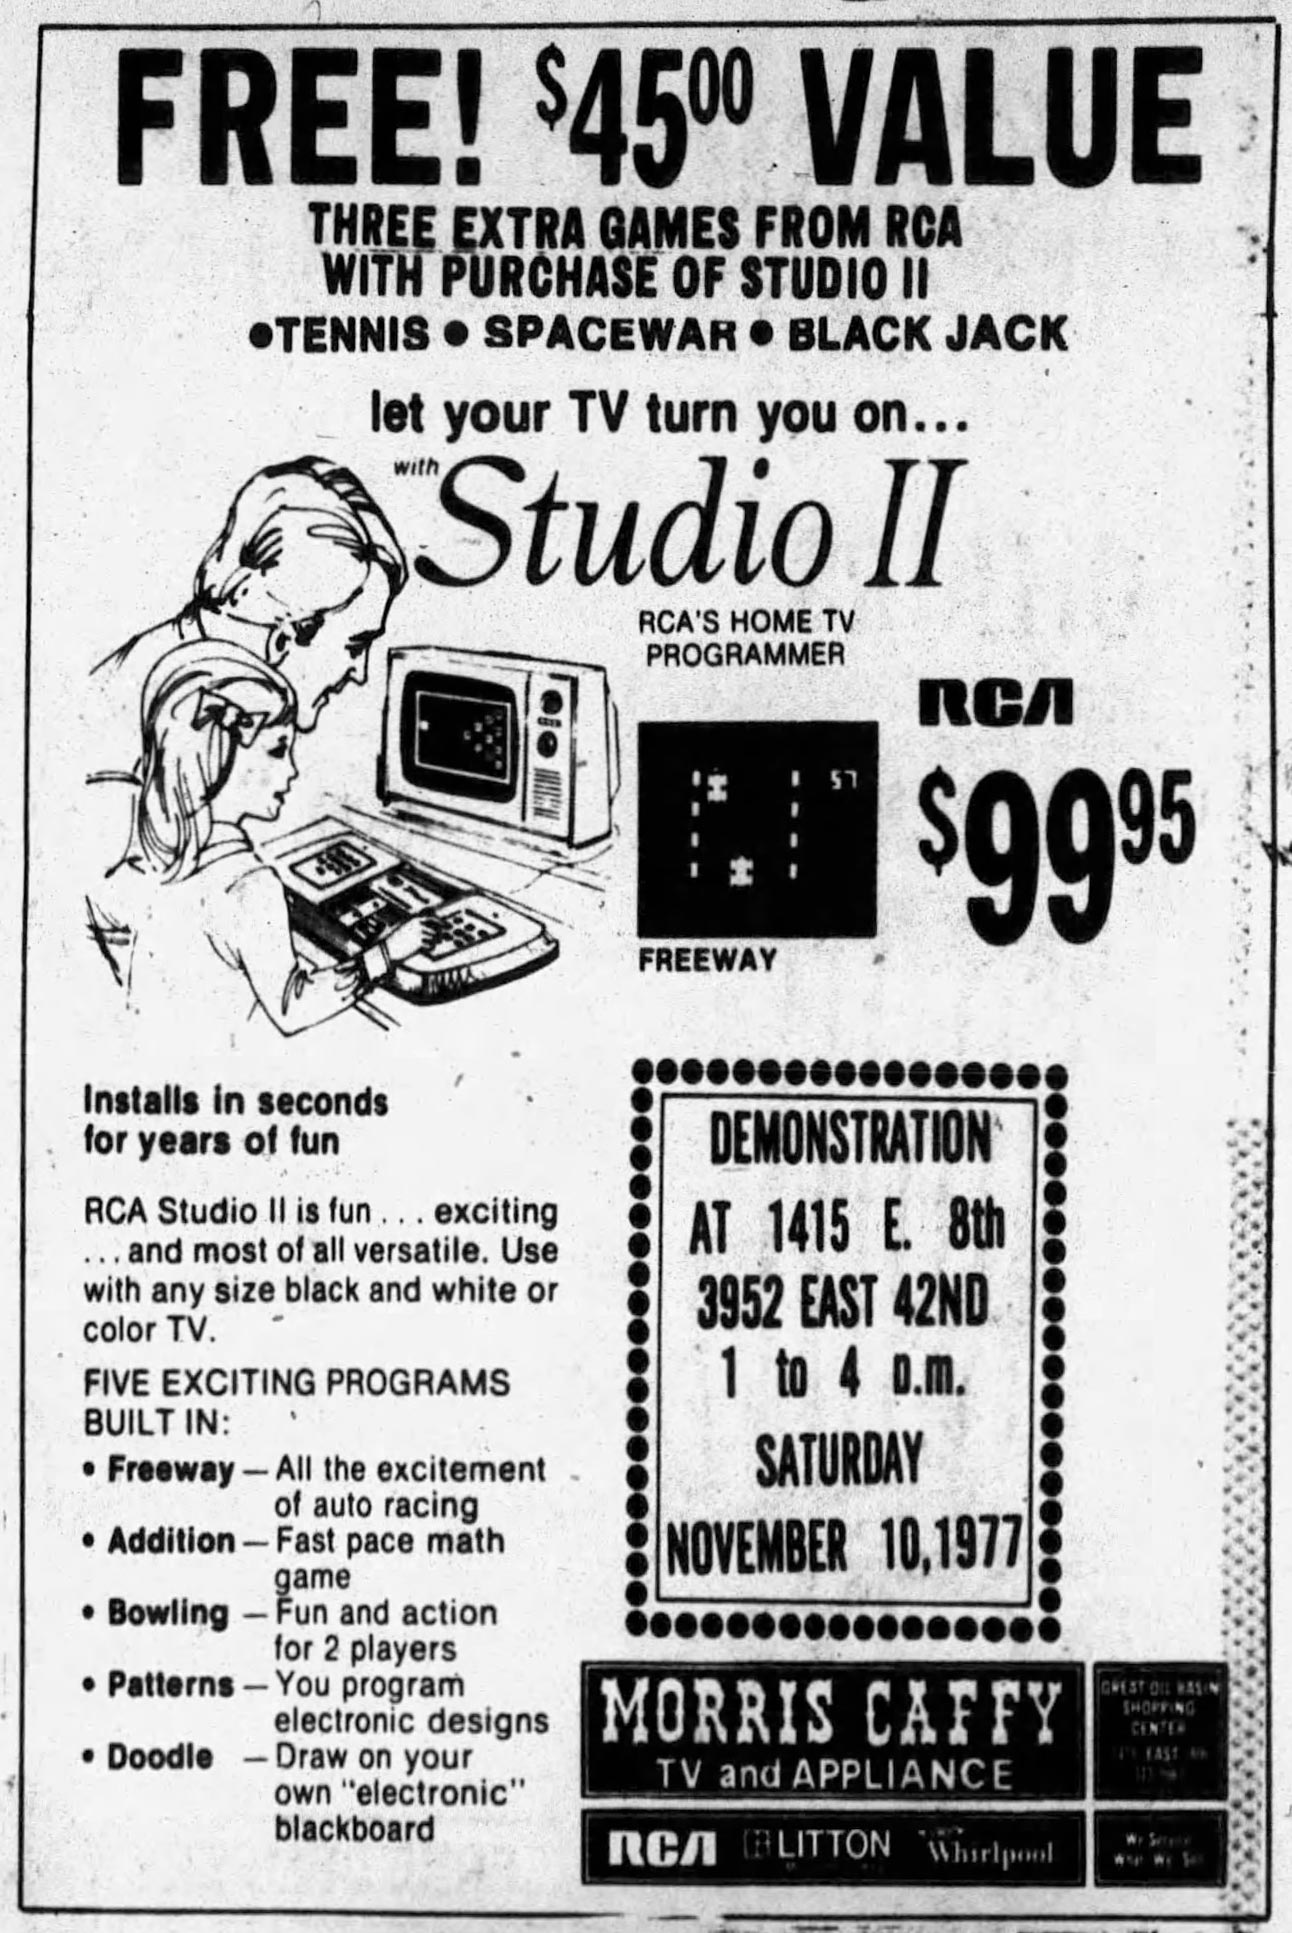 Ad for the Studio II, a home video game console by RCA